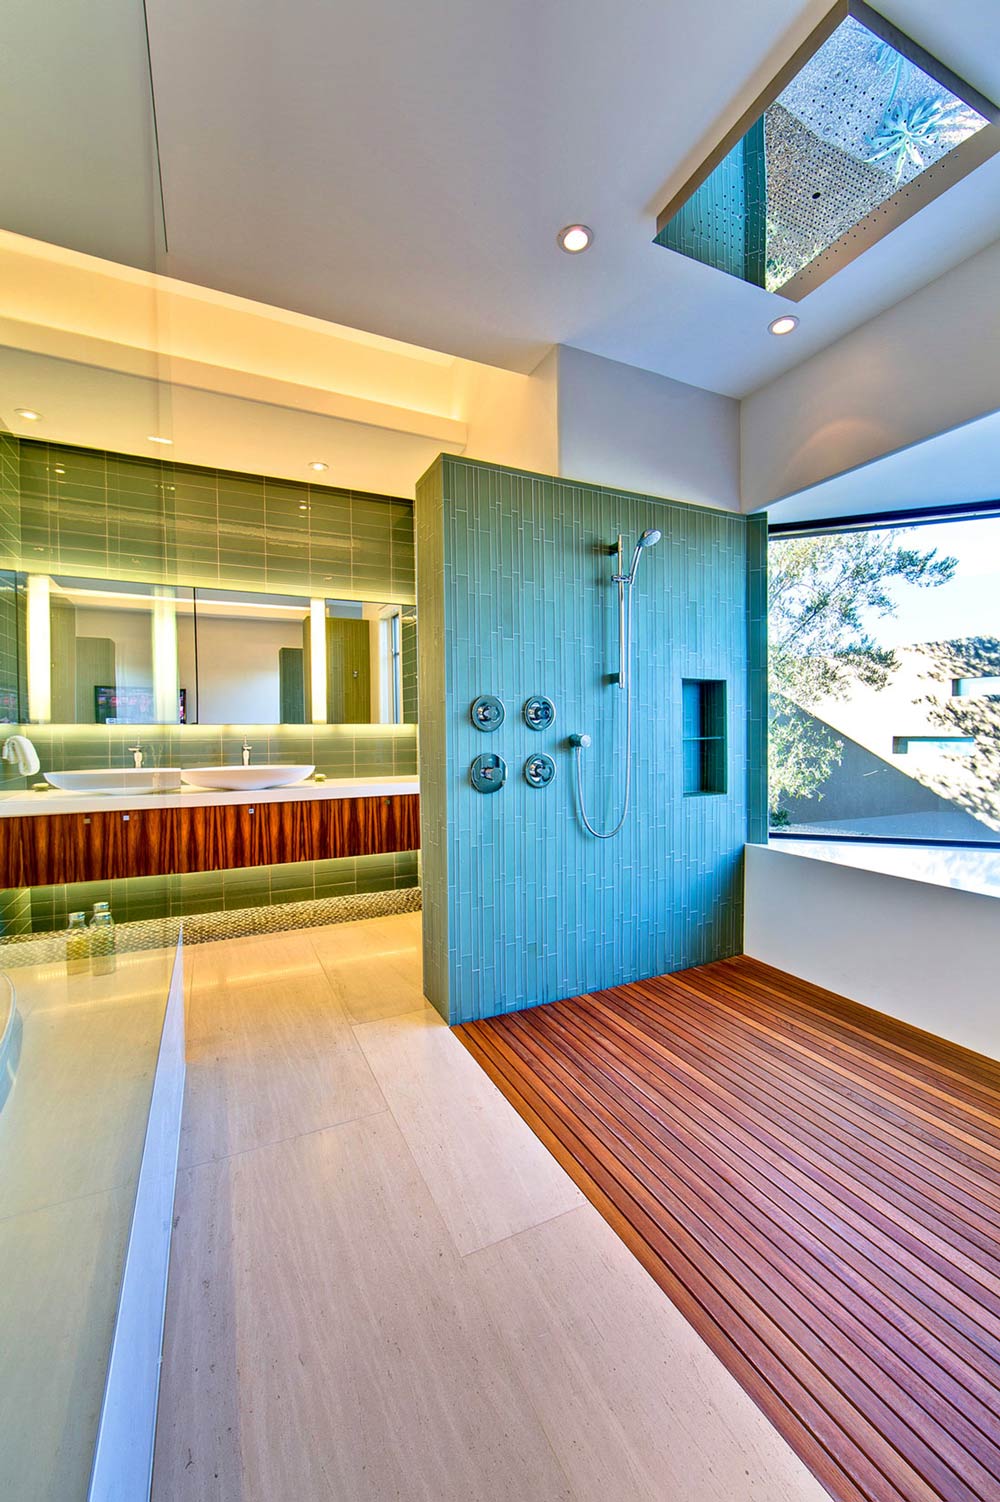 Shower, Wooden Floor, Ironwood Estate in Paradise Valley, Arizona by Kendle Design Collaborative